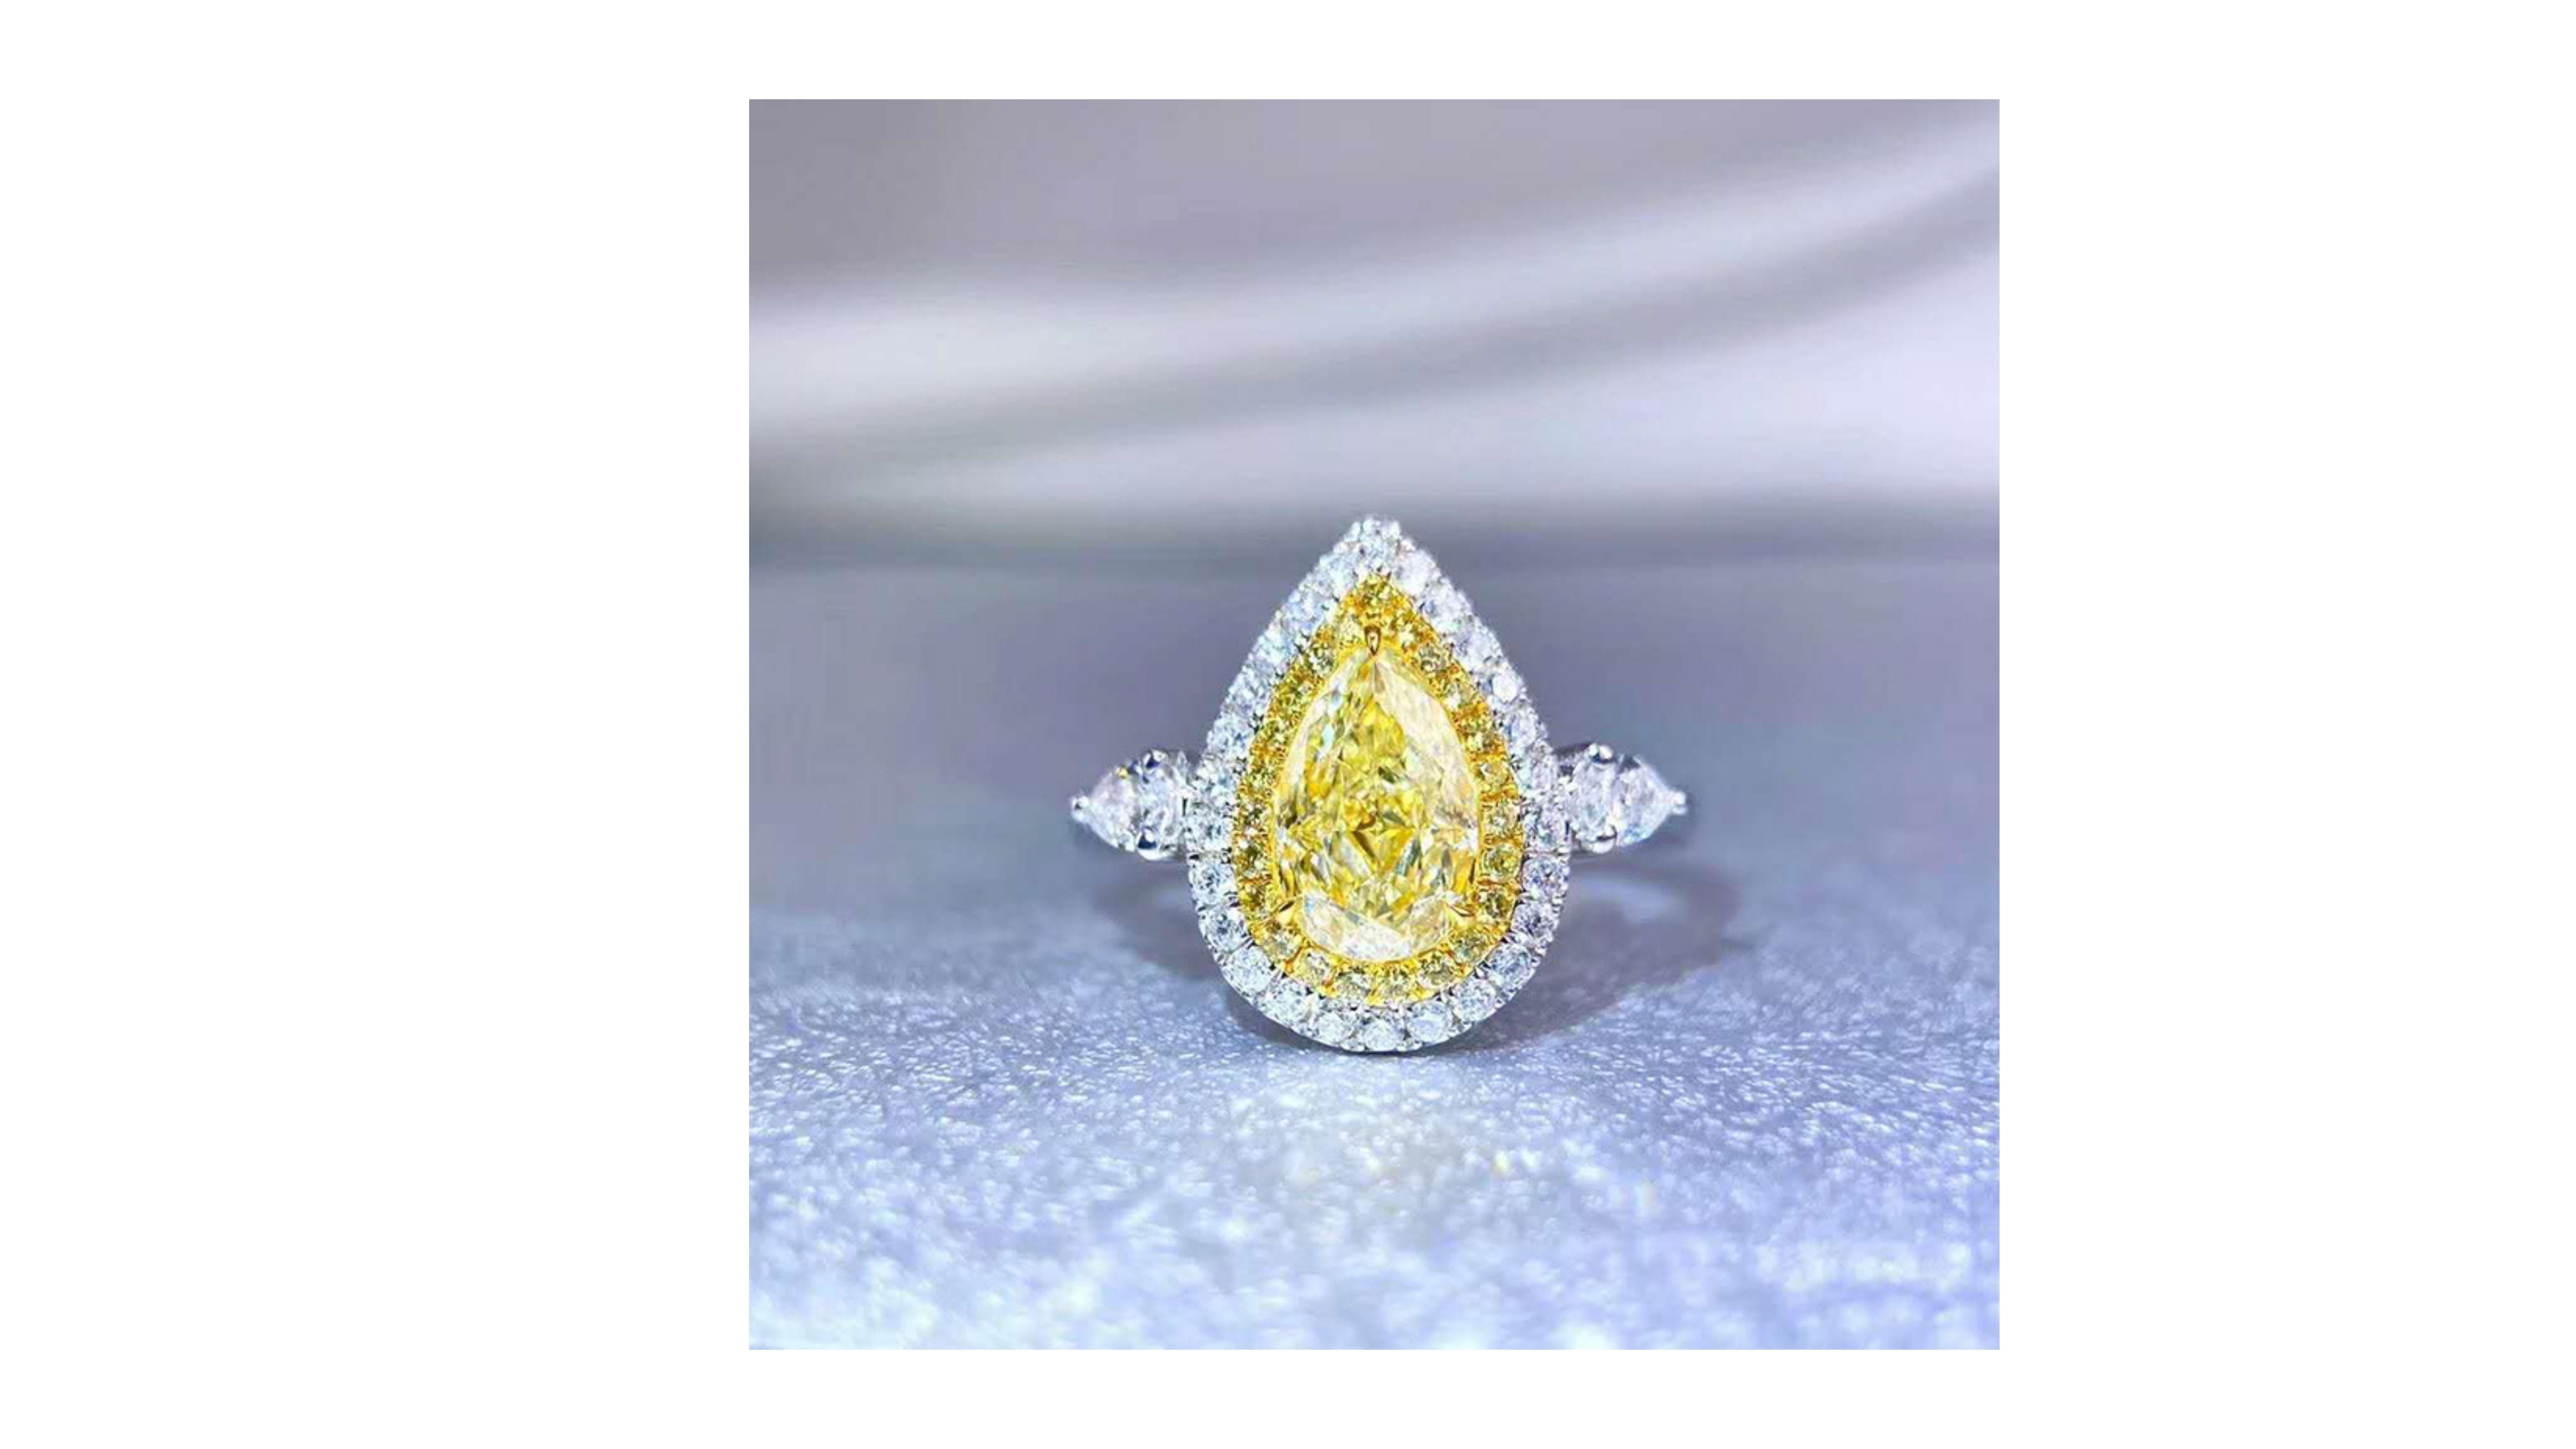 This is  2 Carat Fancy yellow diamond ring with 31 White Diamonds around the main stone and down each side of the band set in 18k White Gold  . It really stands out in this pear cut and if you are looking a specific ring like this in a different